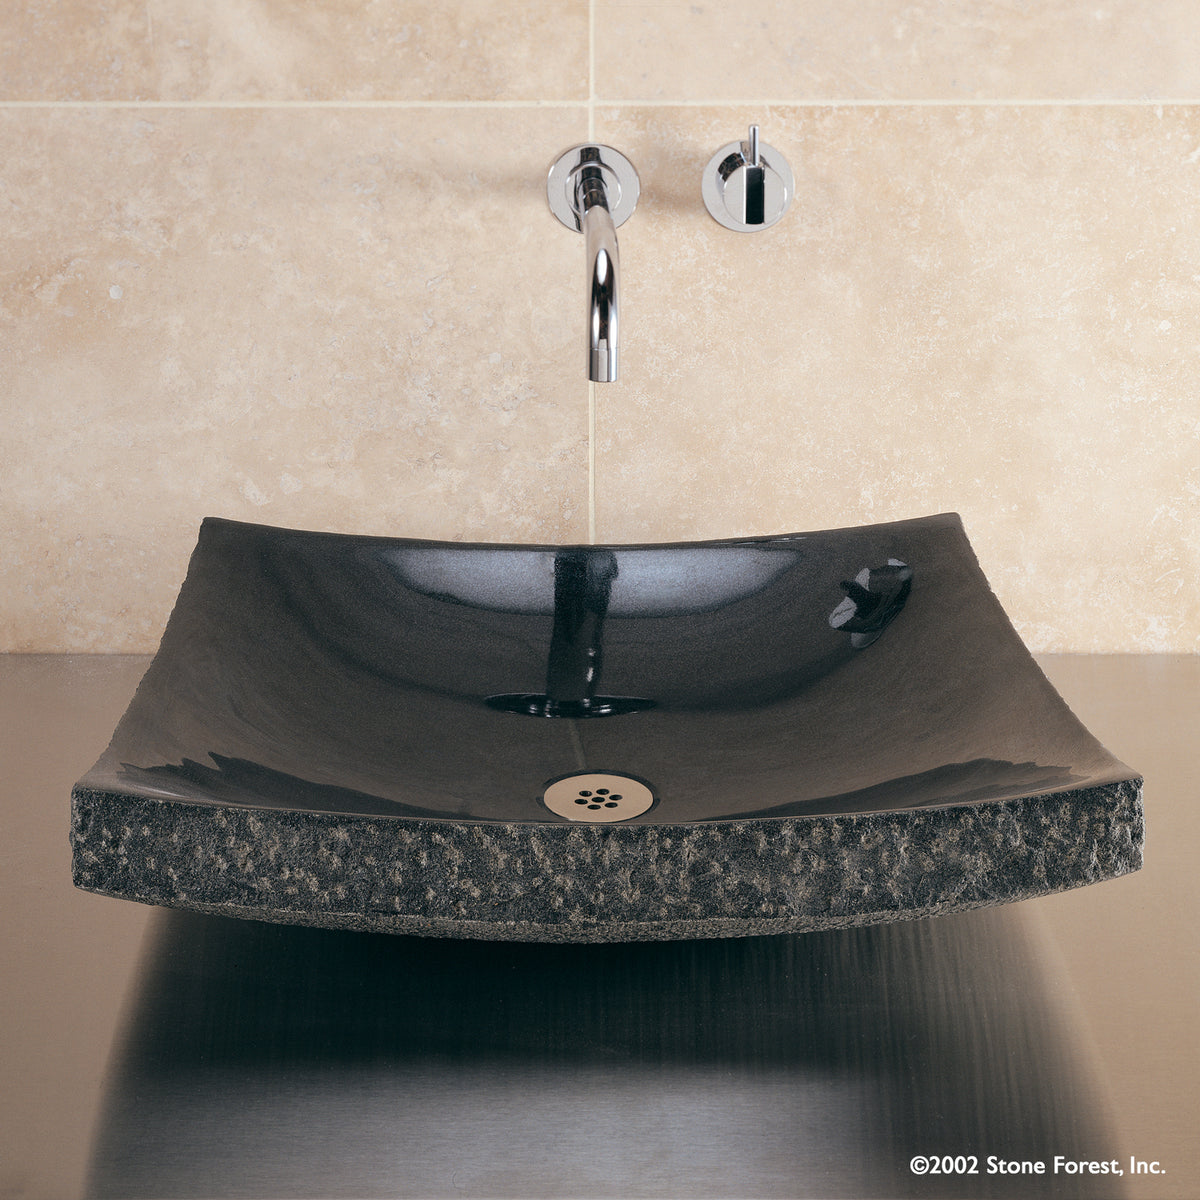 Zen Vessel Sink carved from black granite by Stone Forest image 1 of 2